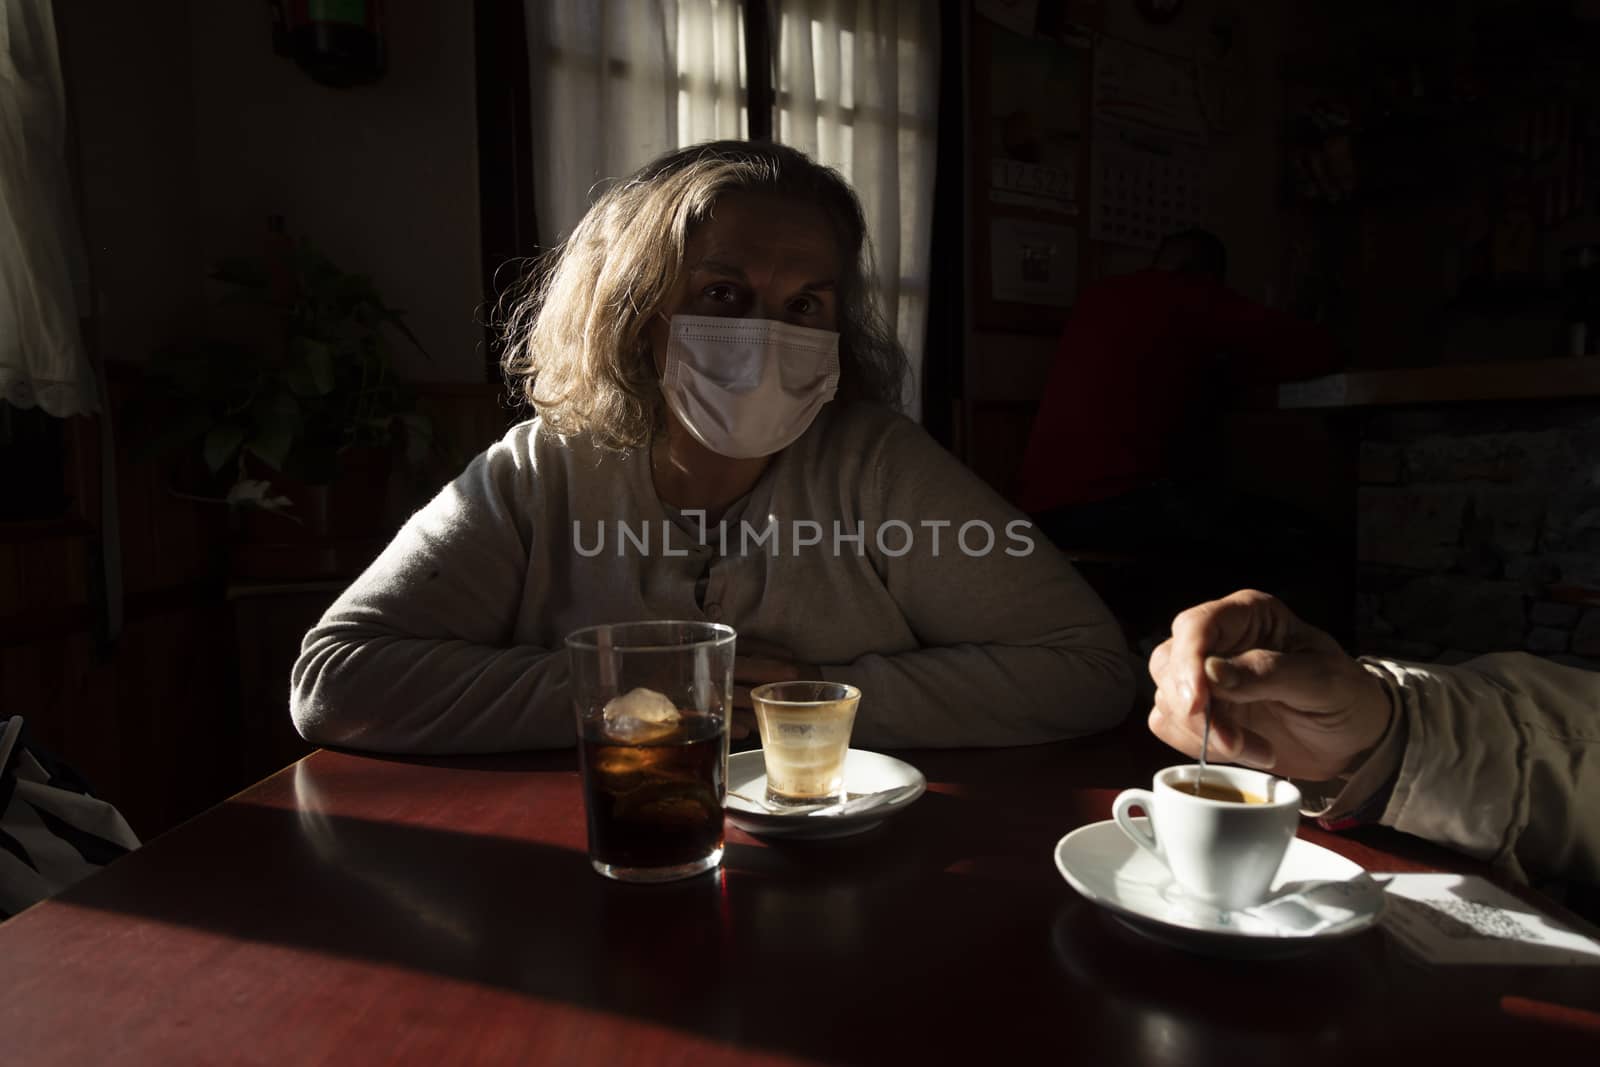 A woman, wearing a mask, watches sitting at a bar table, Spain by alvarobueno